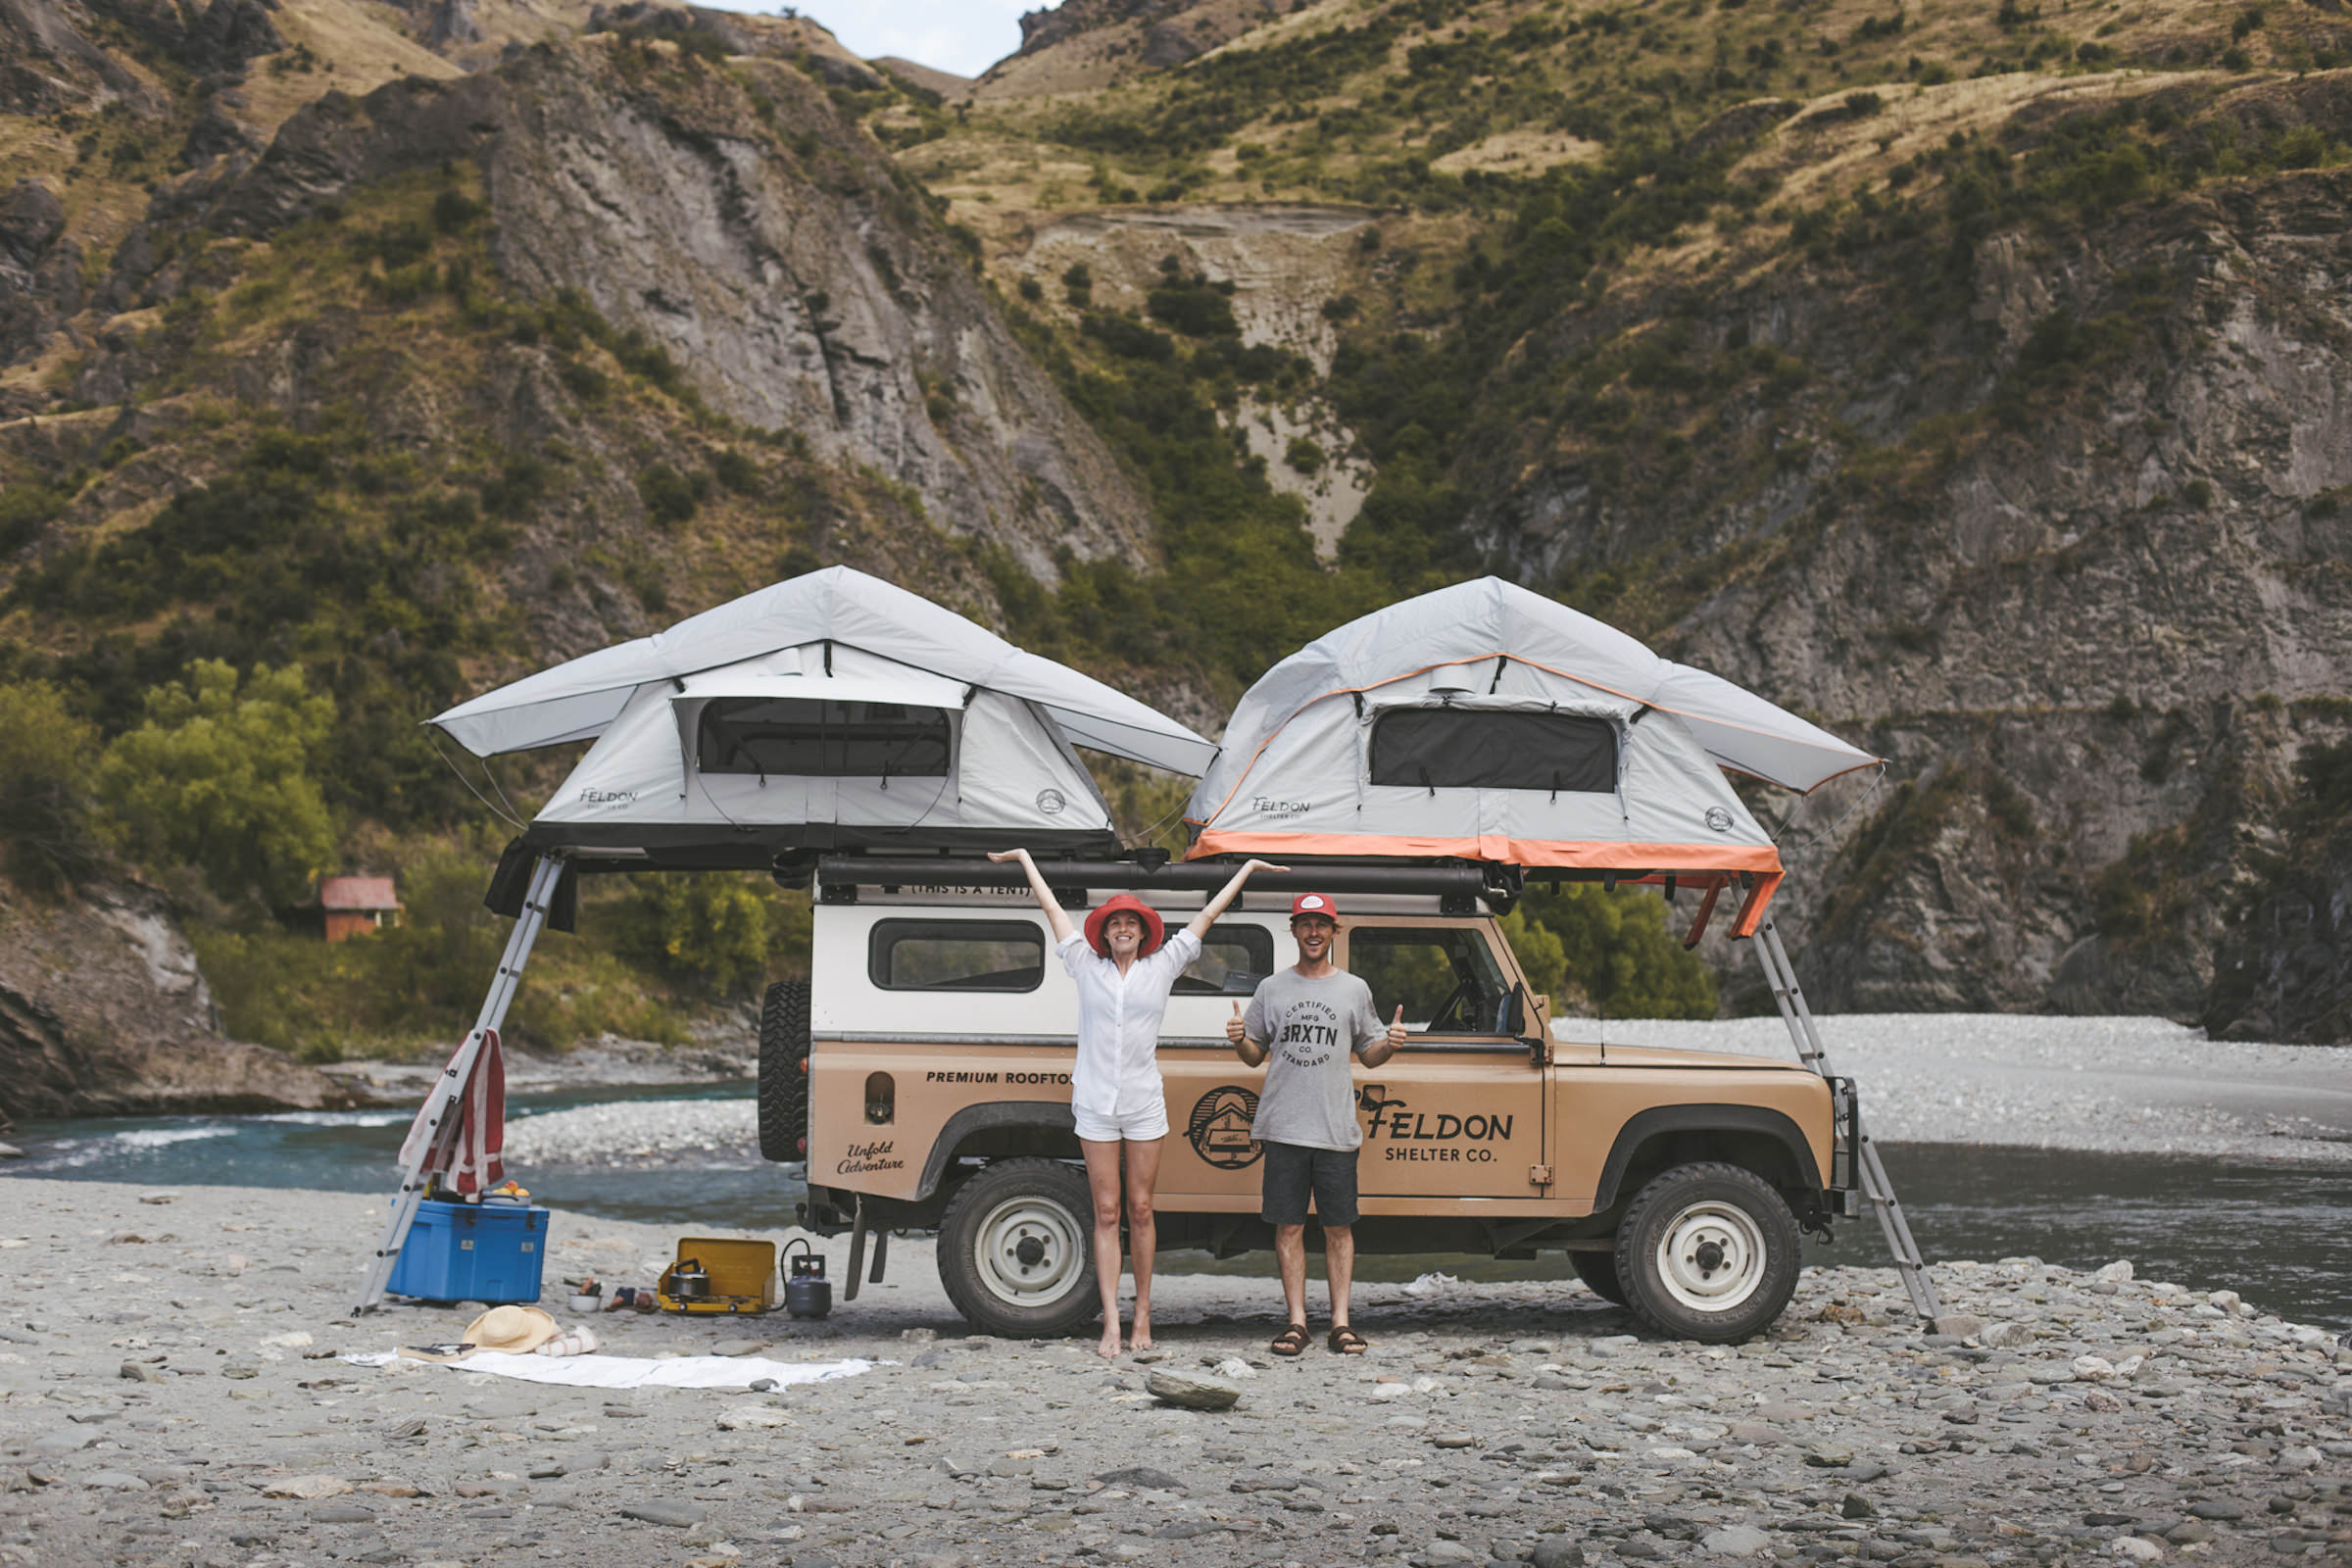 The Crows Nest Extended Rooftop Tent by Feldon Shelter